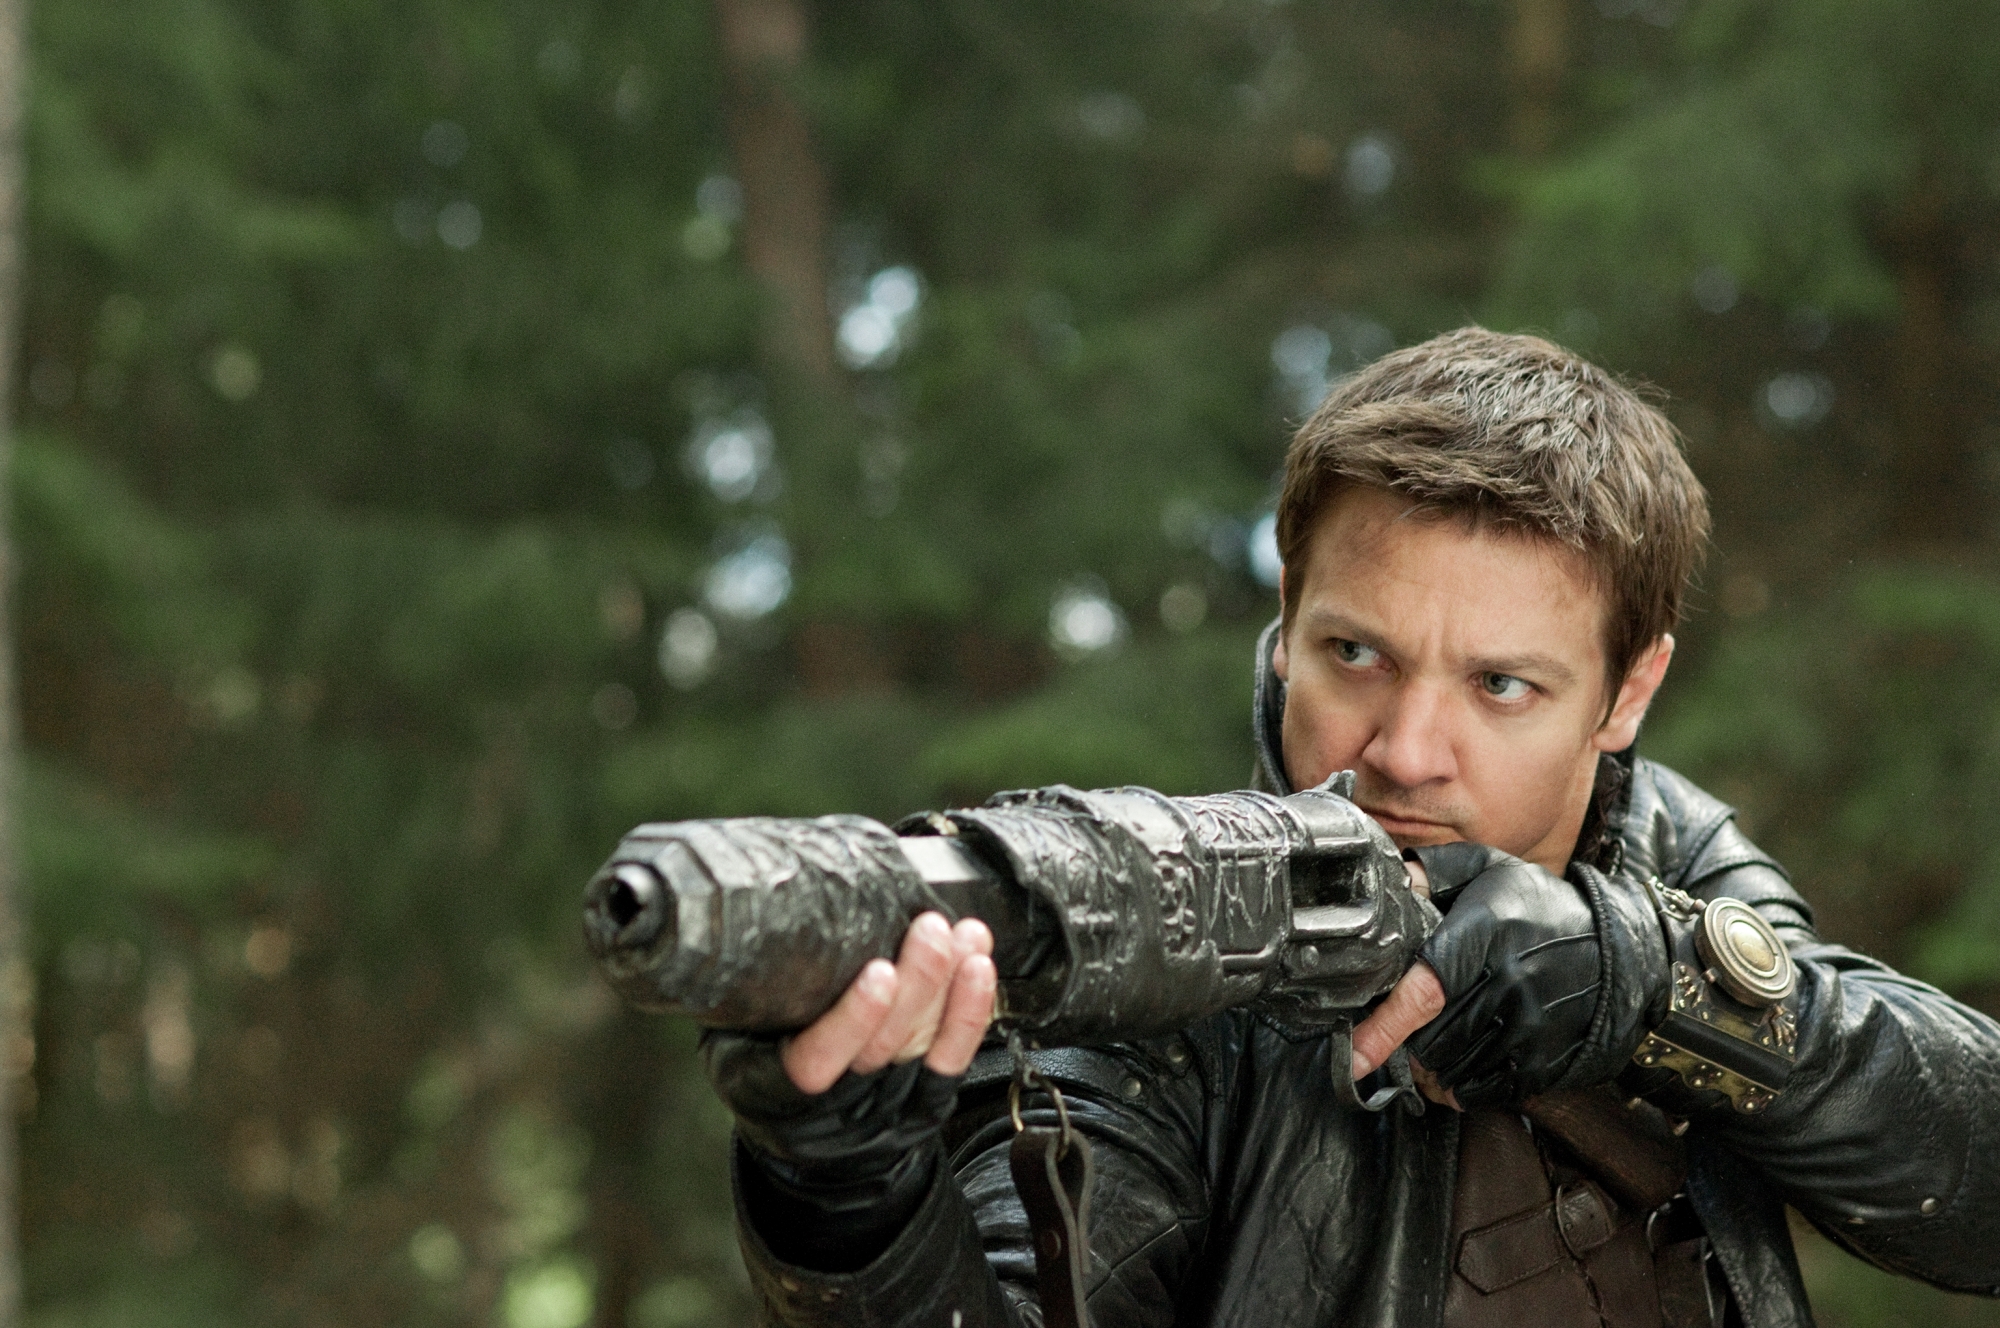 Hansel & Gretel: Witch Hunters Wallpapers